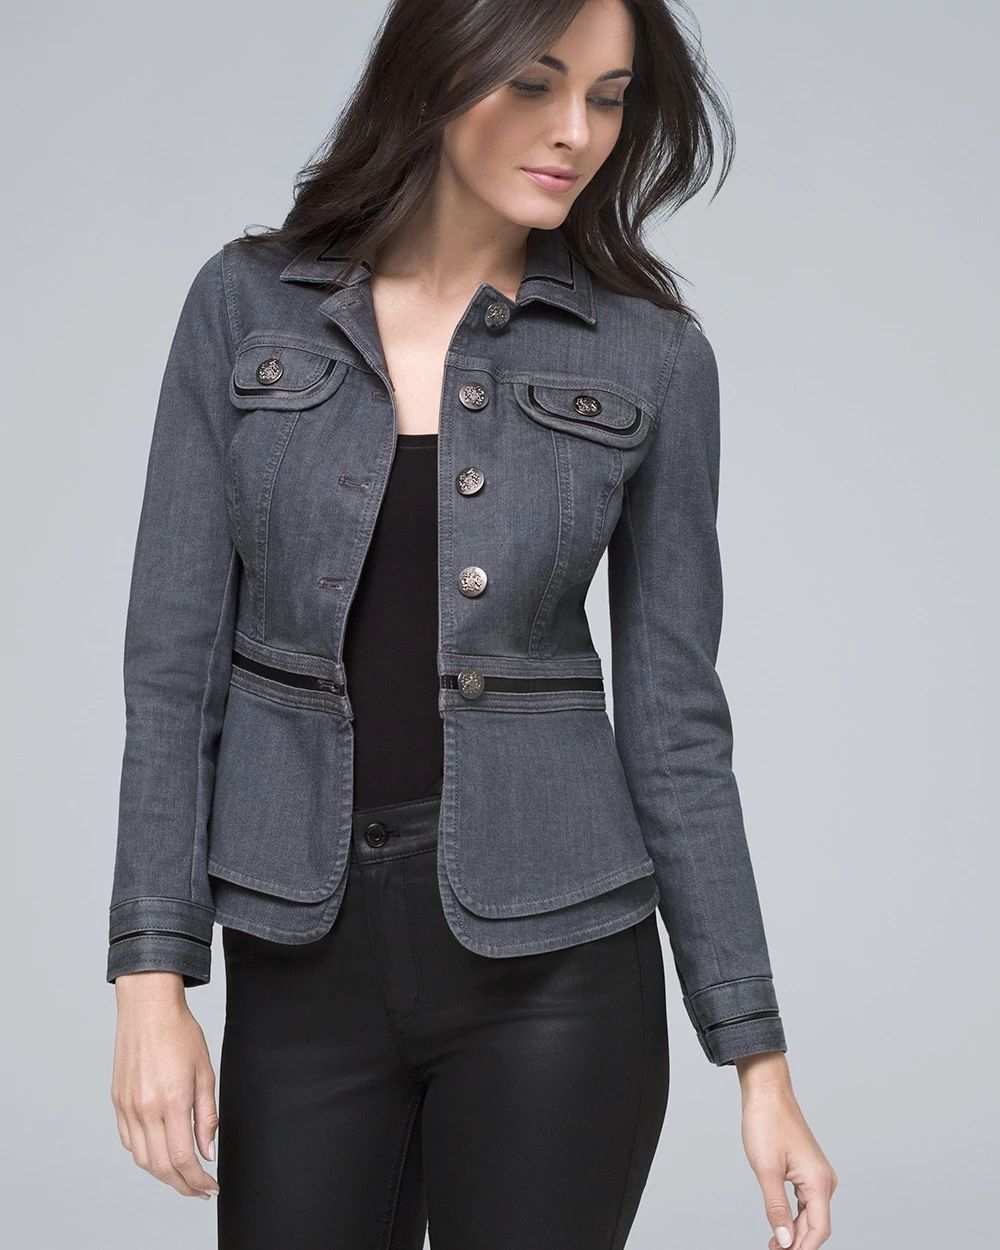 Peplum Casual Jacket with Faux Leather Trim